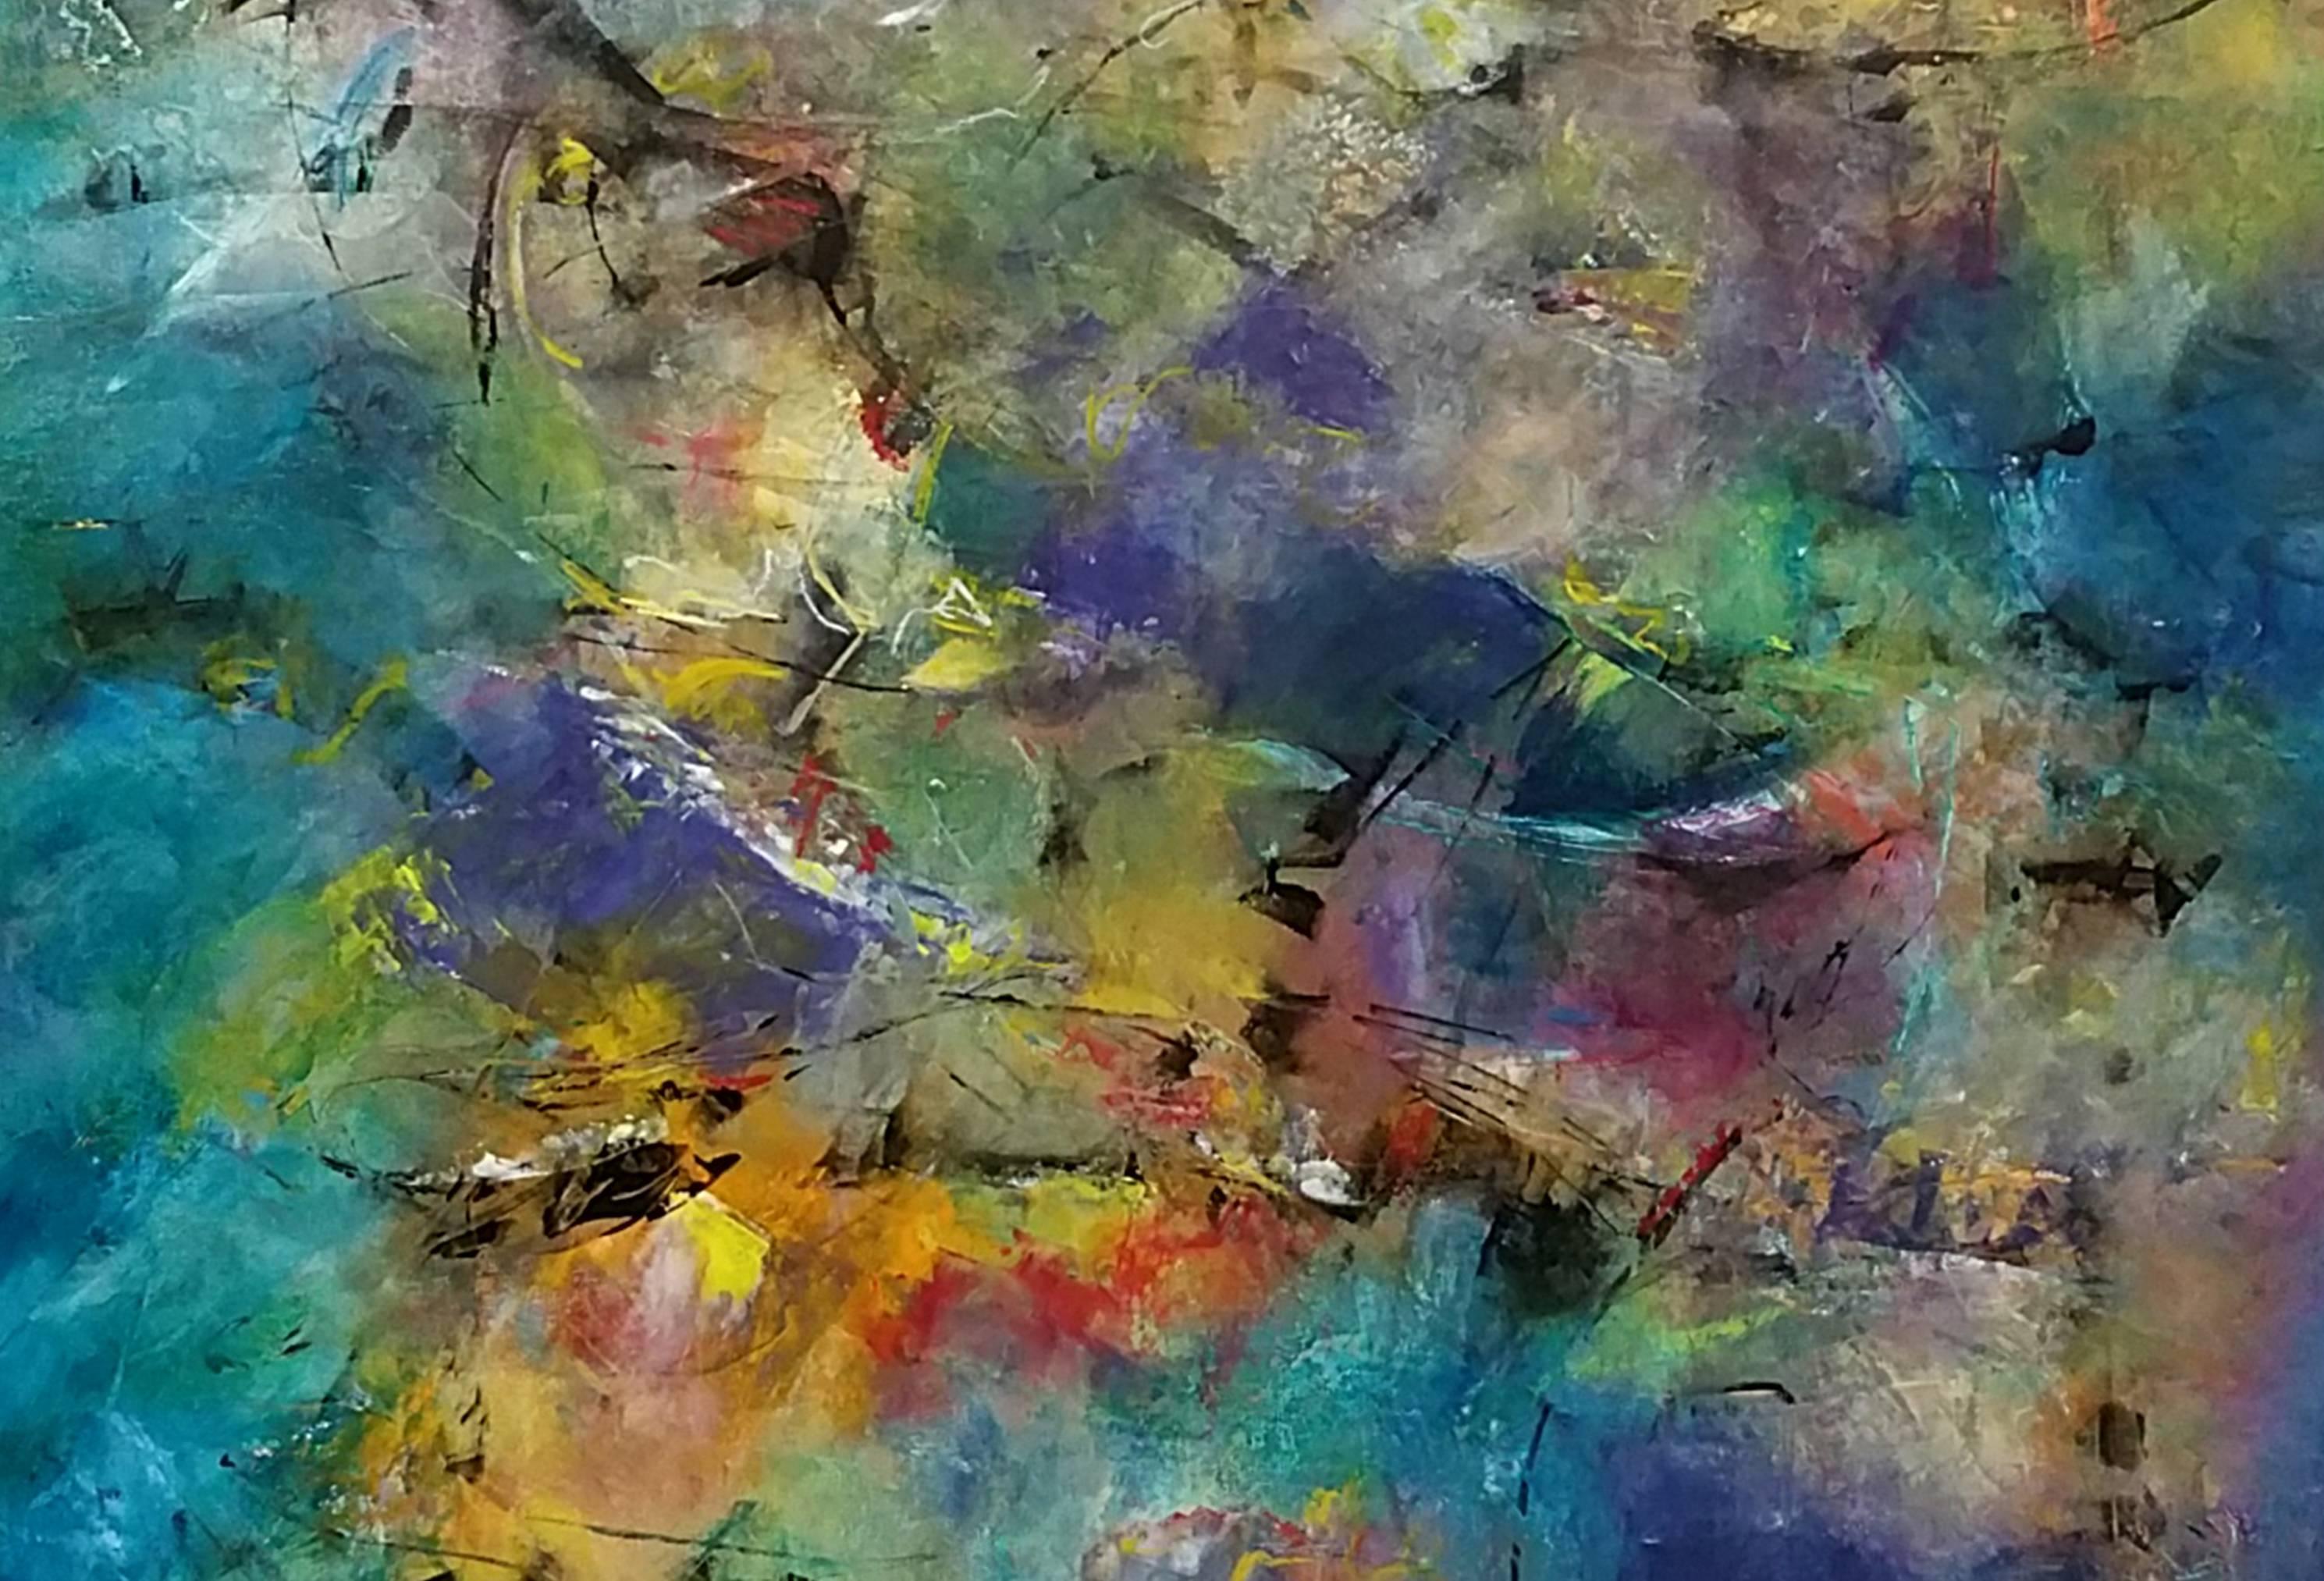 Energy Abounds - Gray Abstract Painting by Aleta Pippin